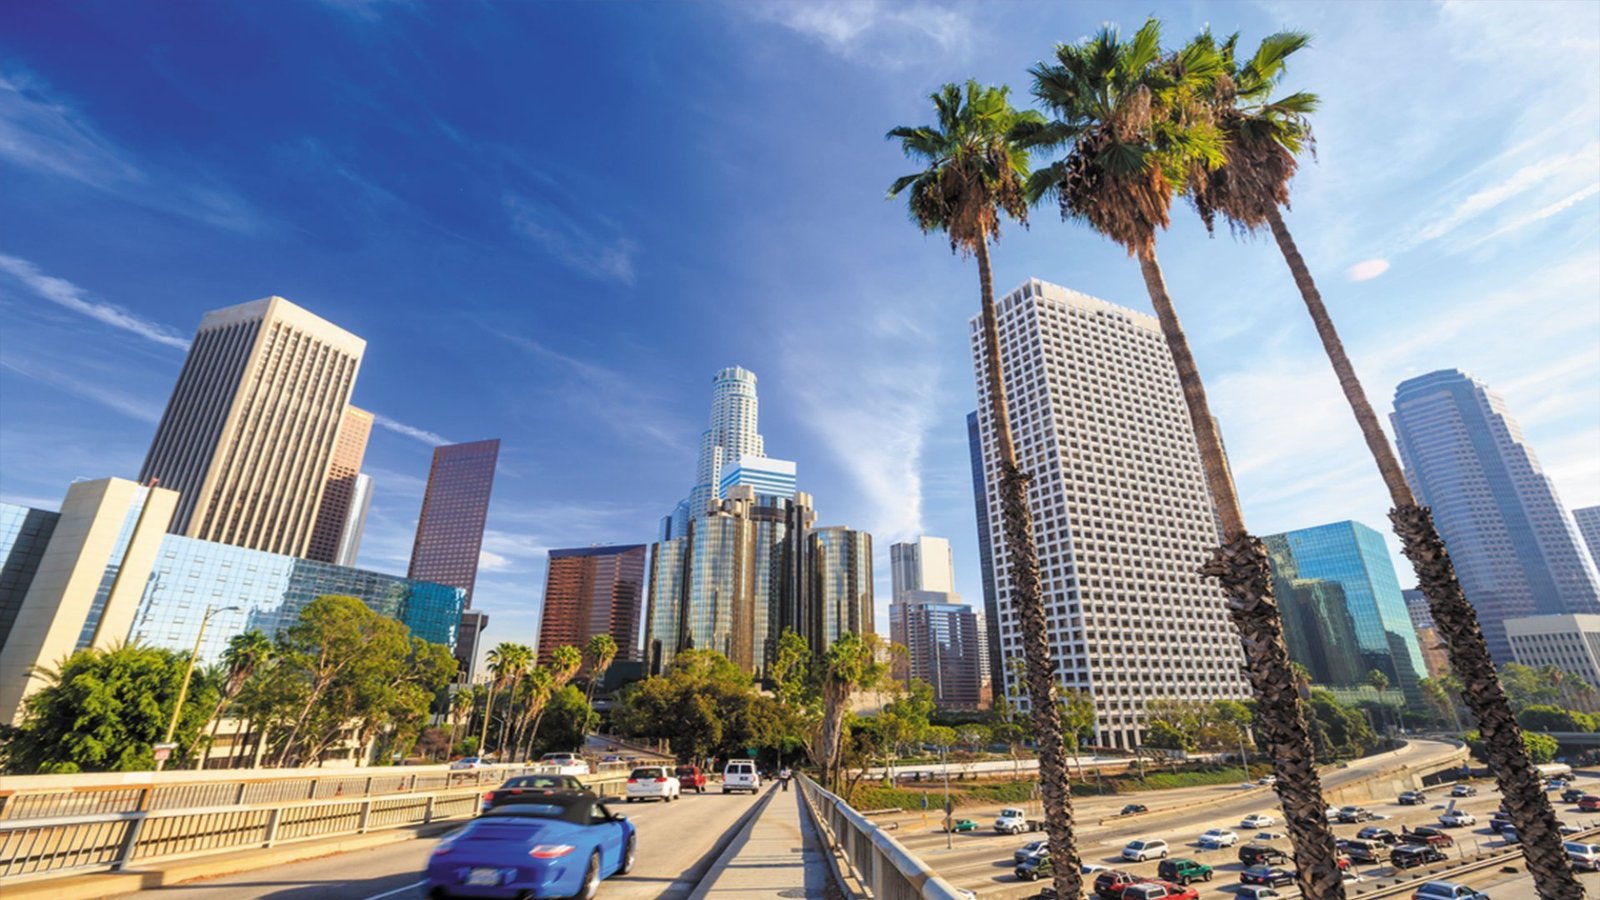 Vacation Travel Guide To Los Angeles Best Places Destinations To Visit In USA explore tourist attractions guide vacation tourism